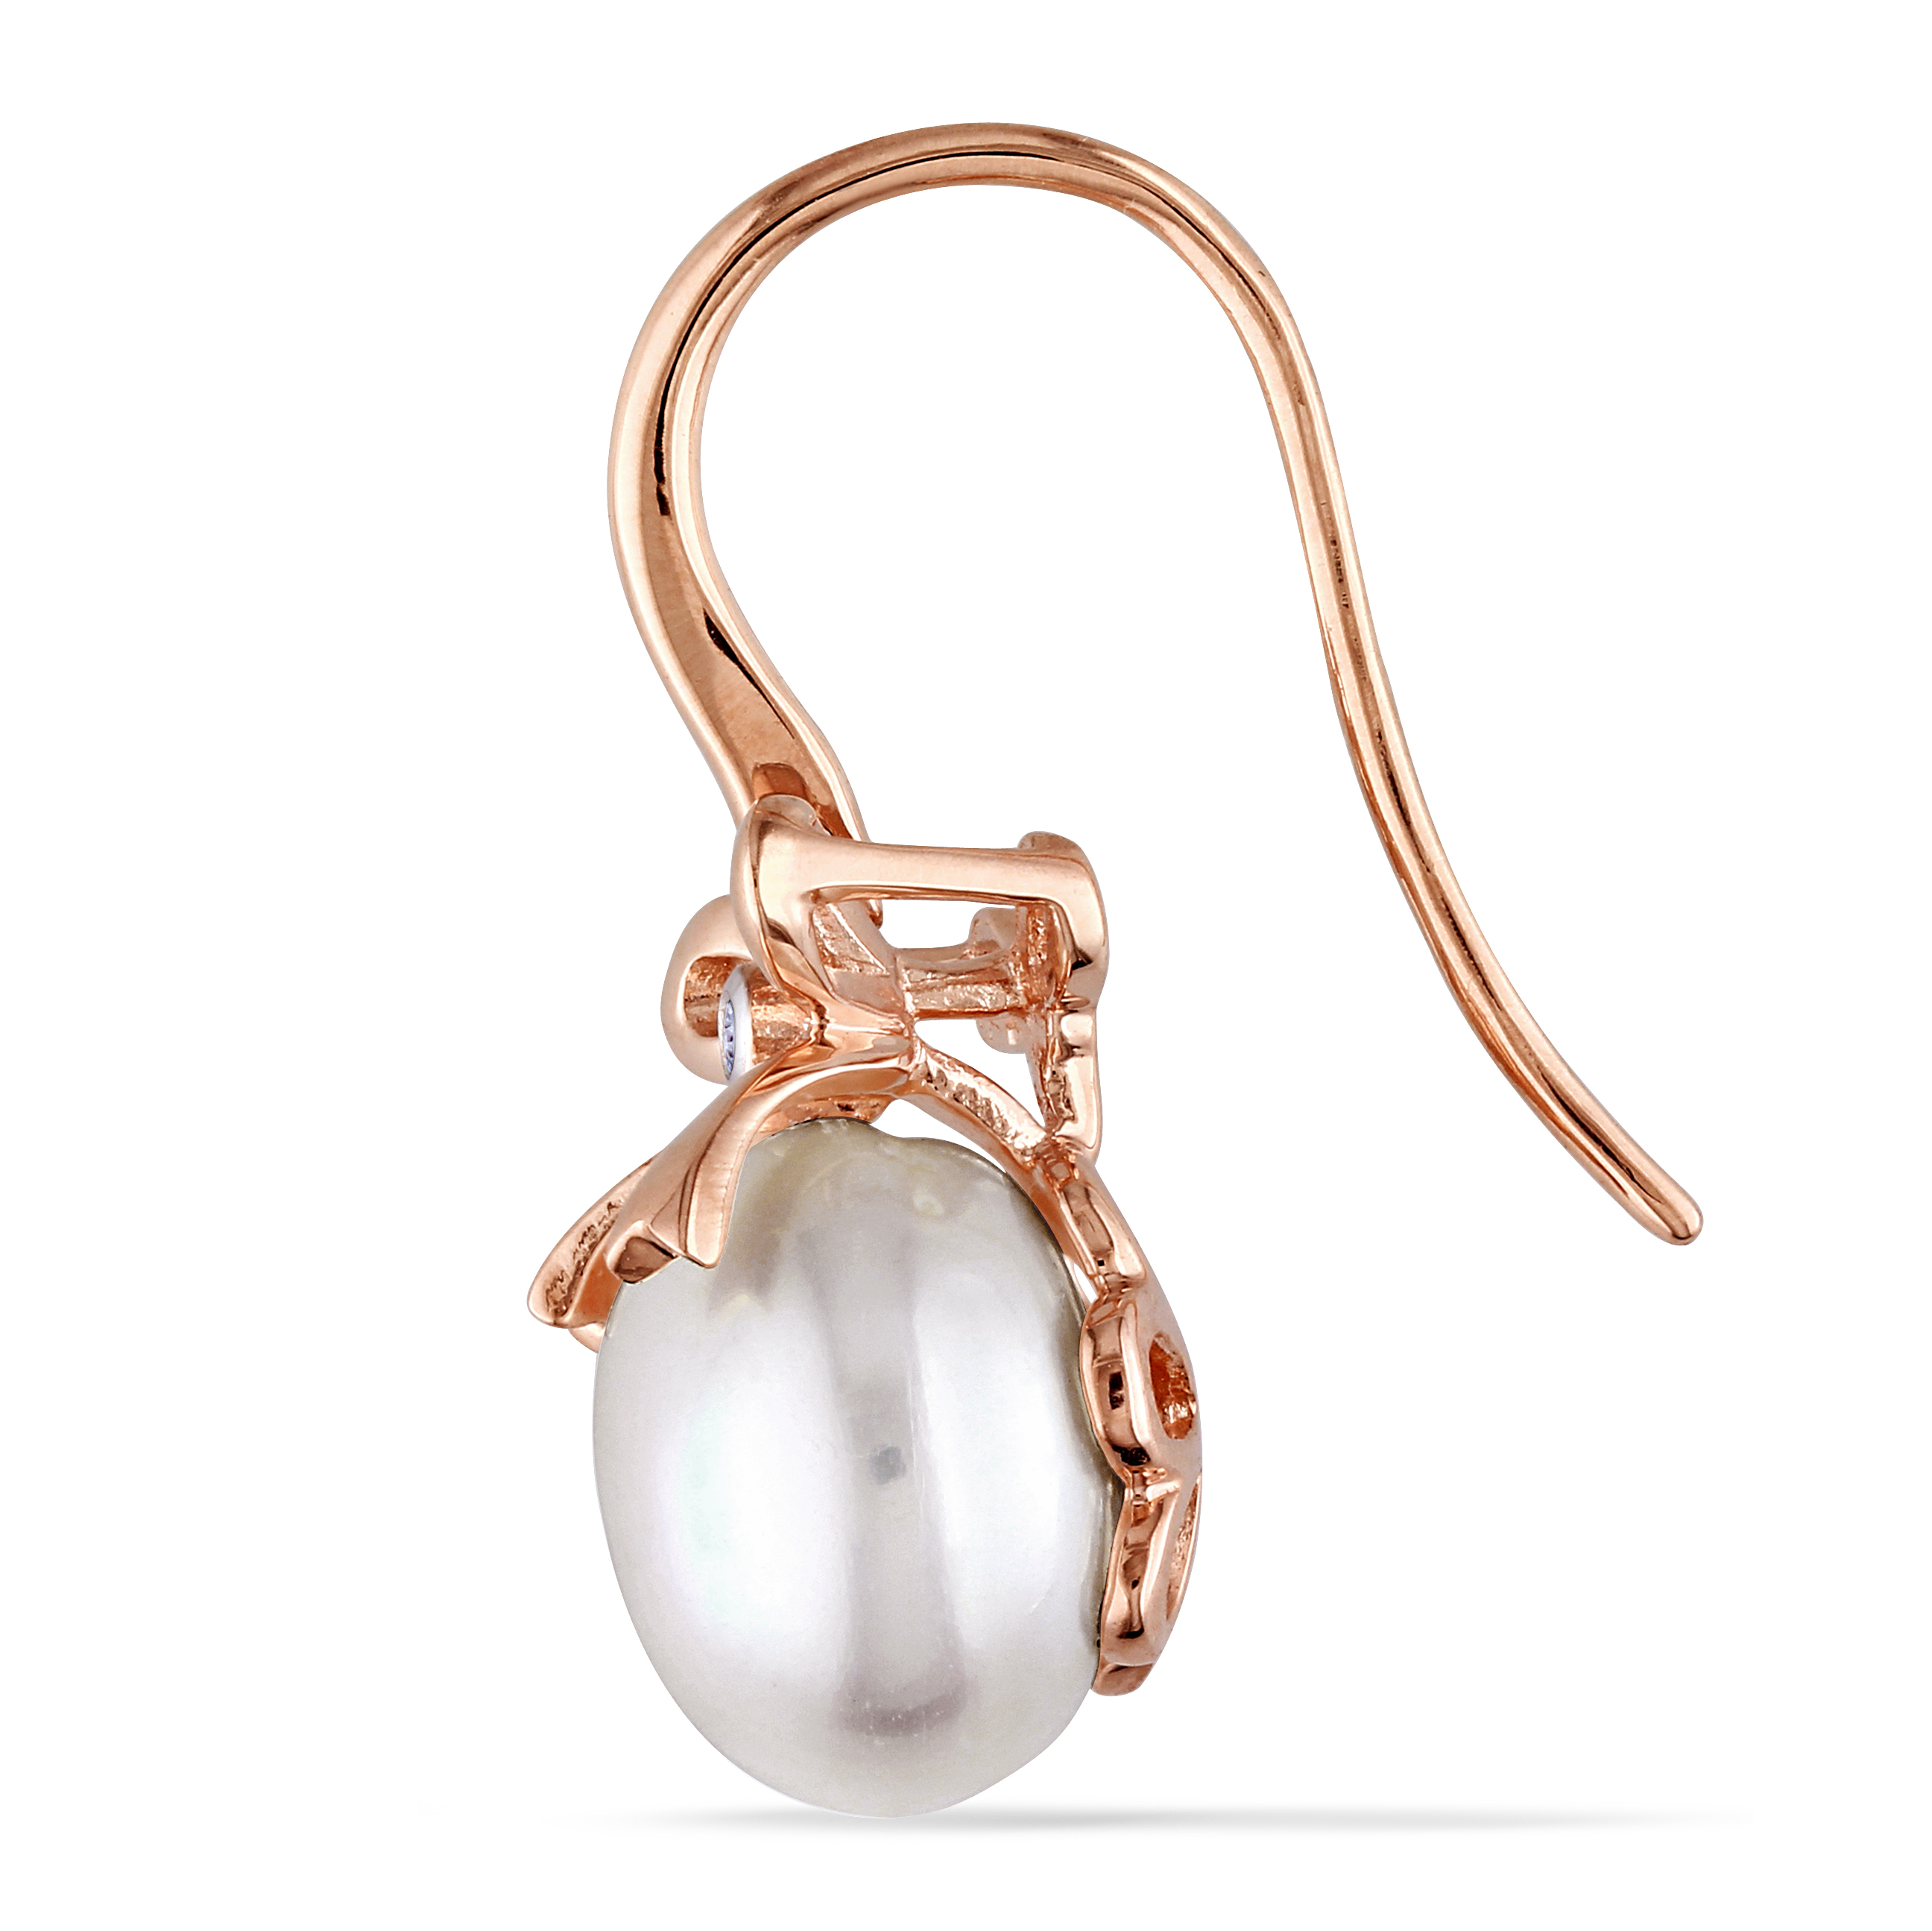 10.5 - 11 MM Cultured Freshwater Pearl and Diamond Bow Drop Hook Earrings in 10k Rose Gold